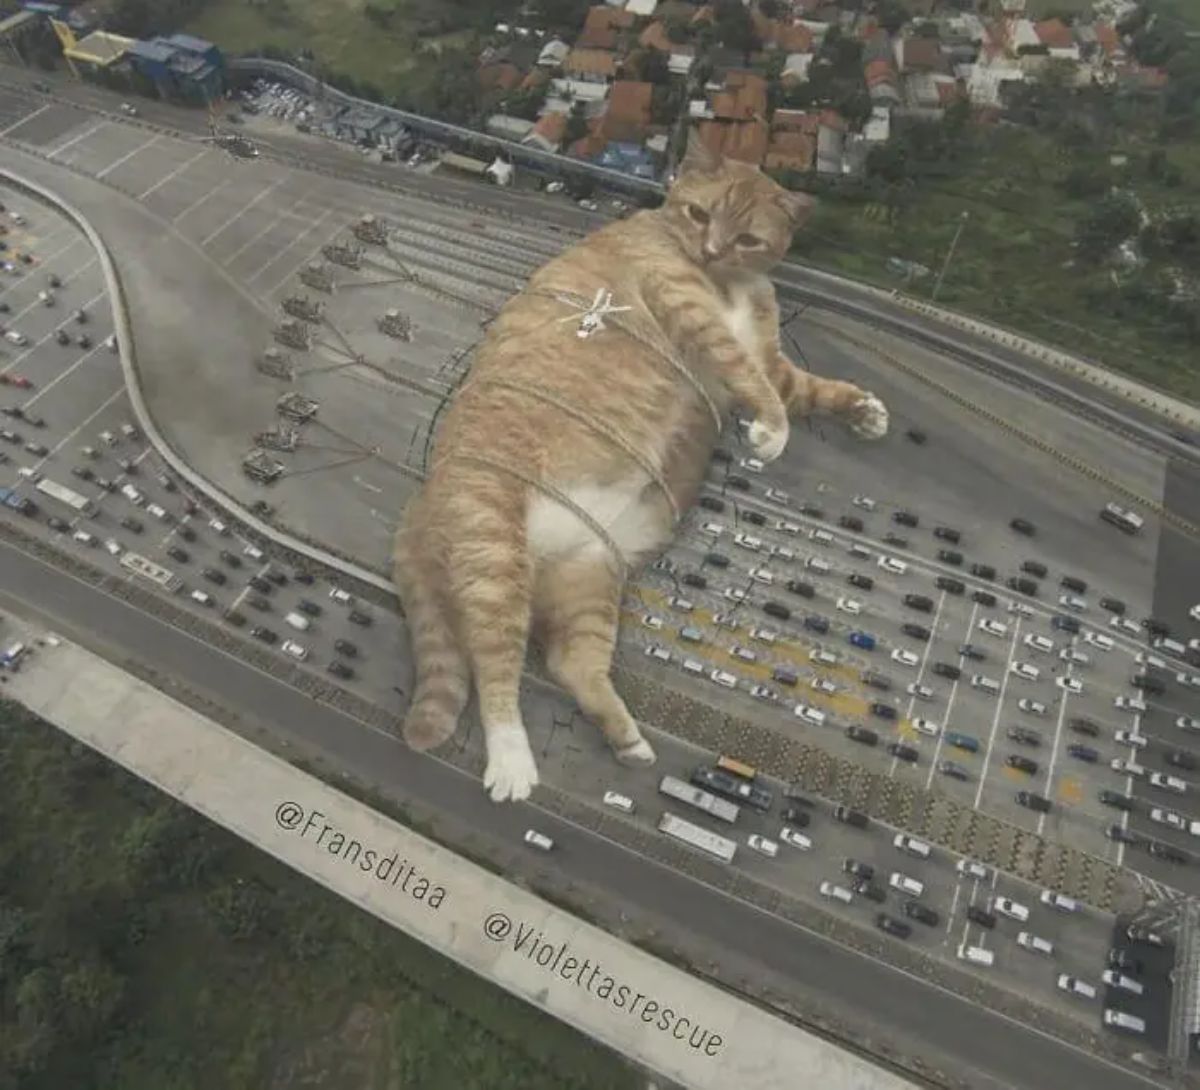 giant photoshopped orange and white cat laying across a multi-lane highway blocking cars with some trucks and a helicopter tying the cat up with thick rope